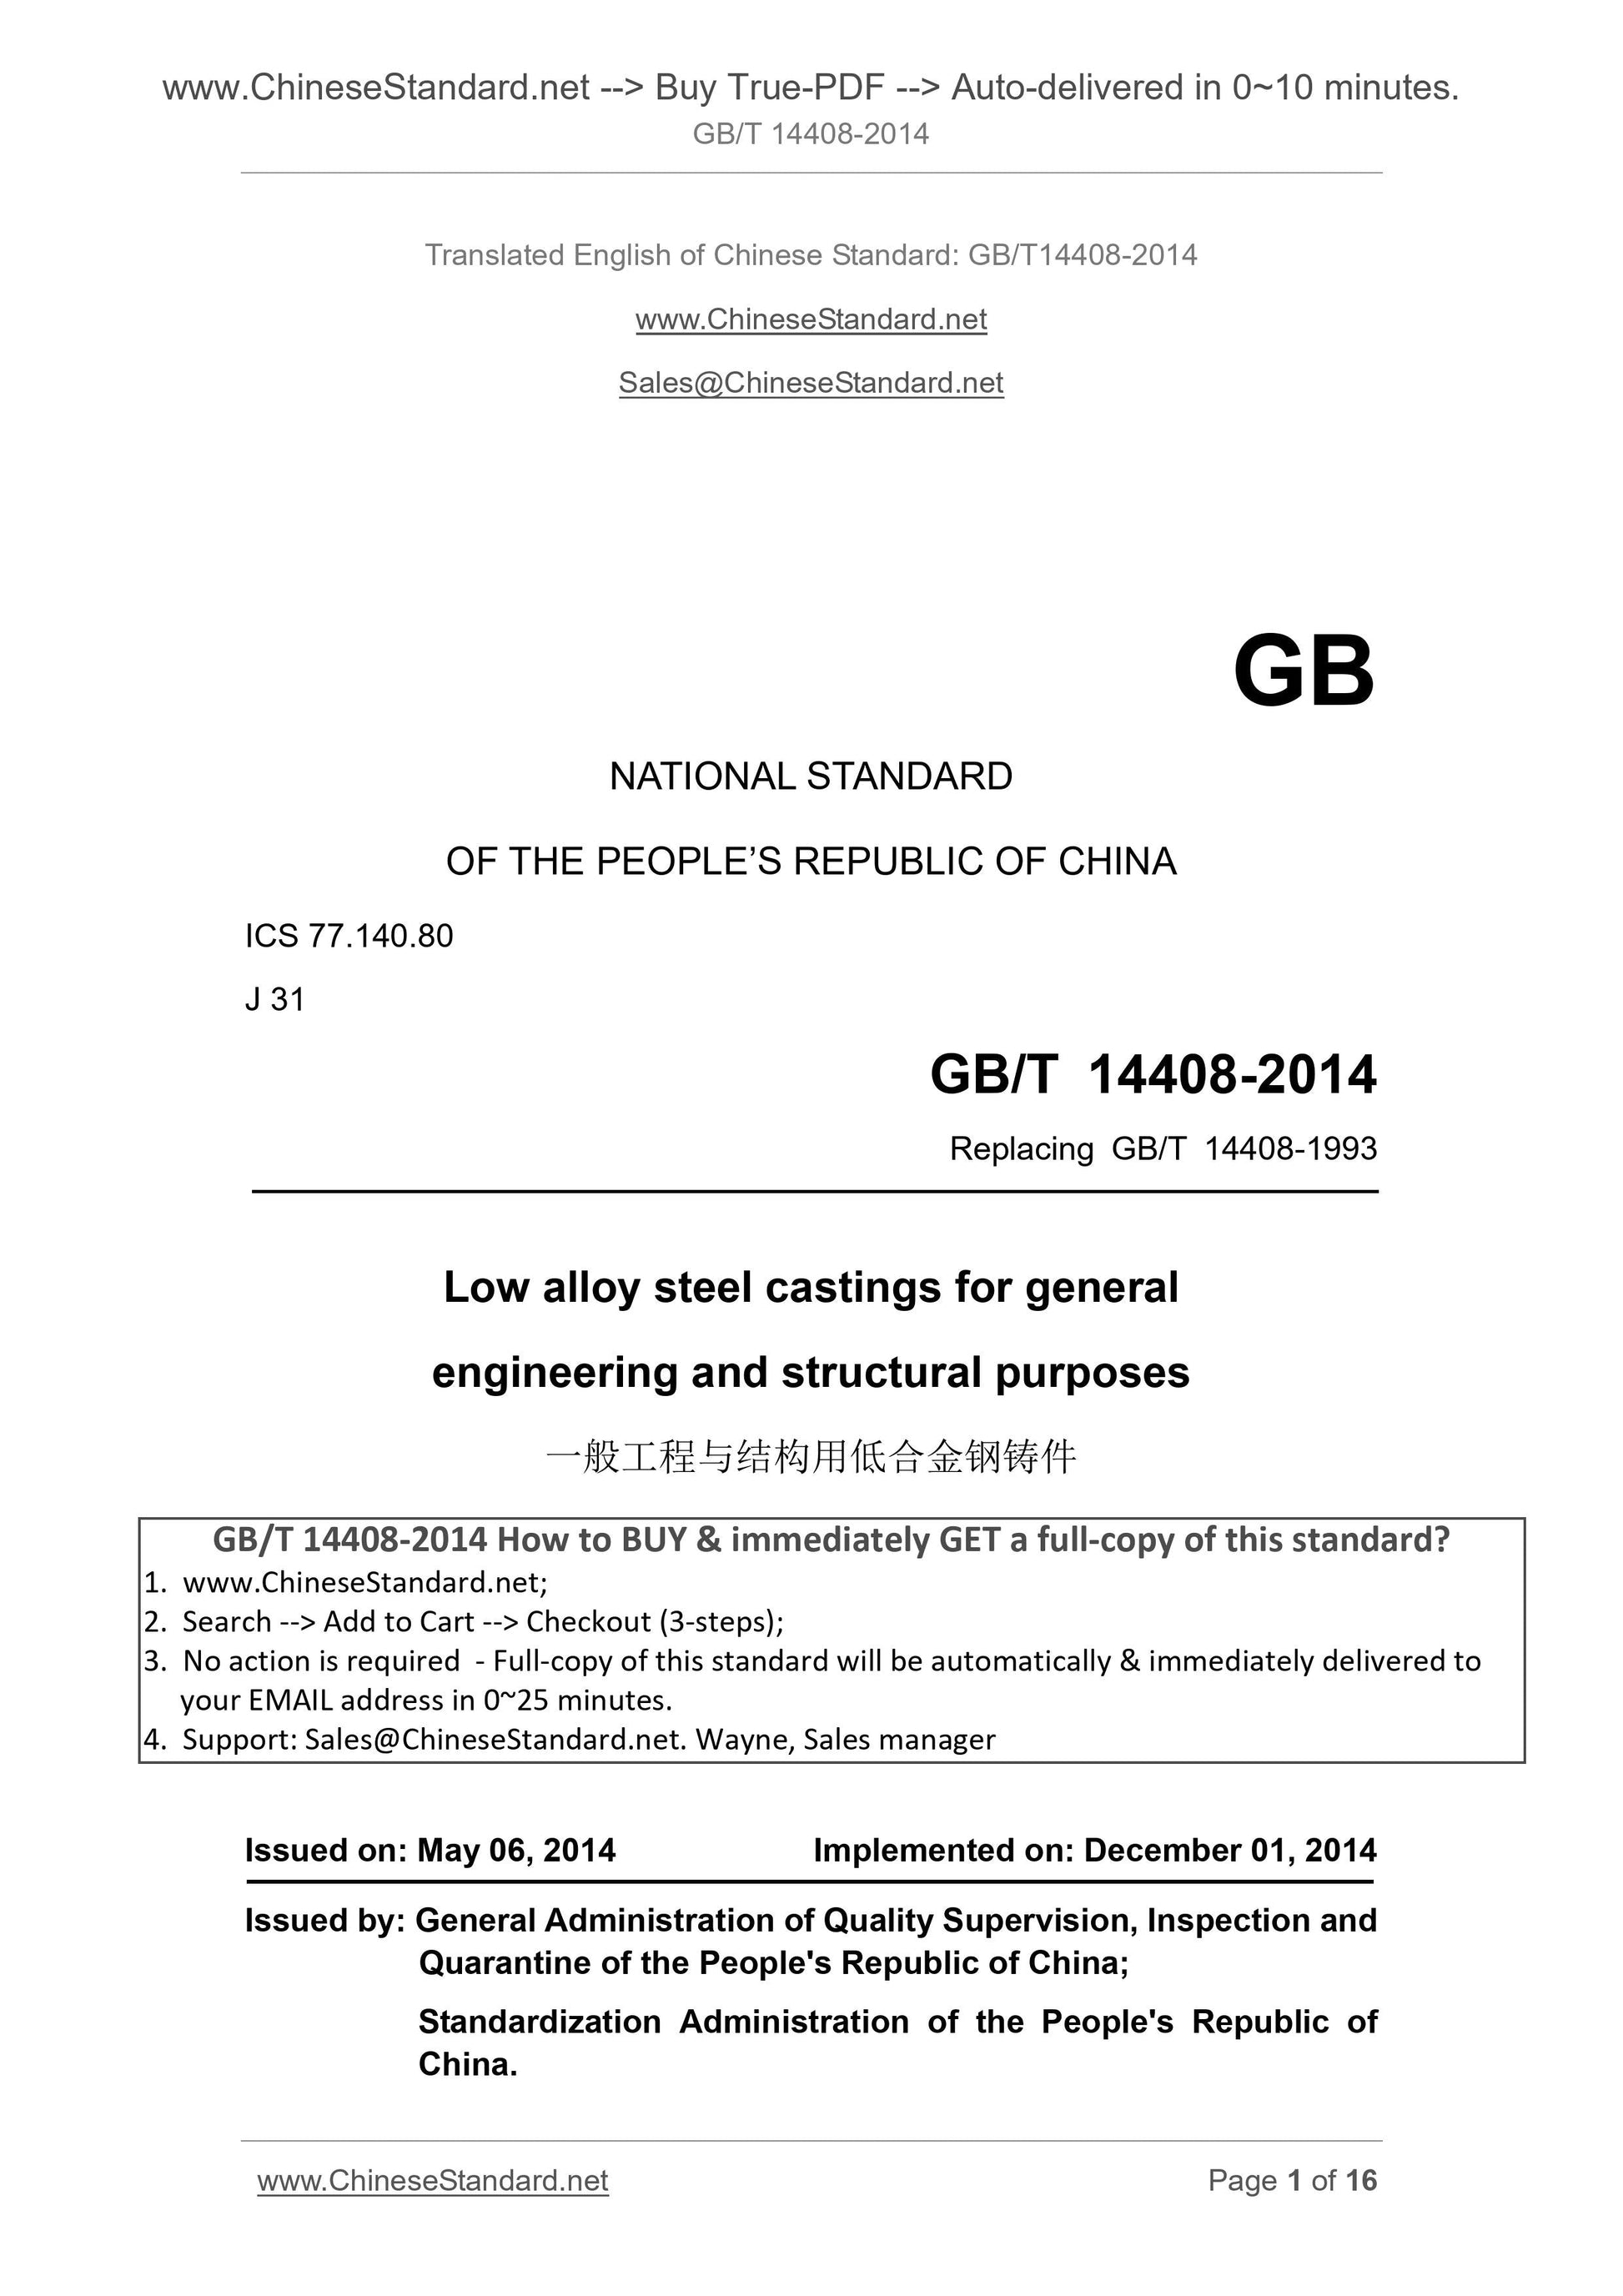 GB/T 14408-2014 Page 1